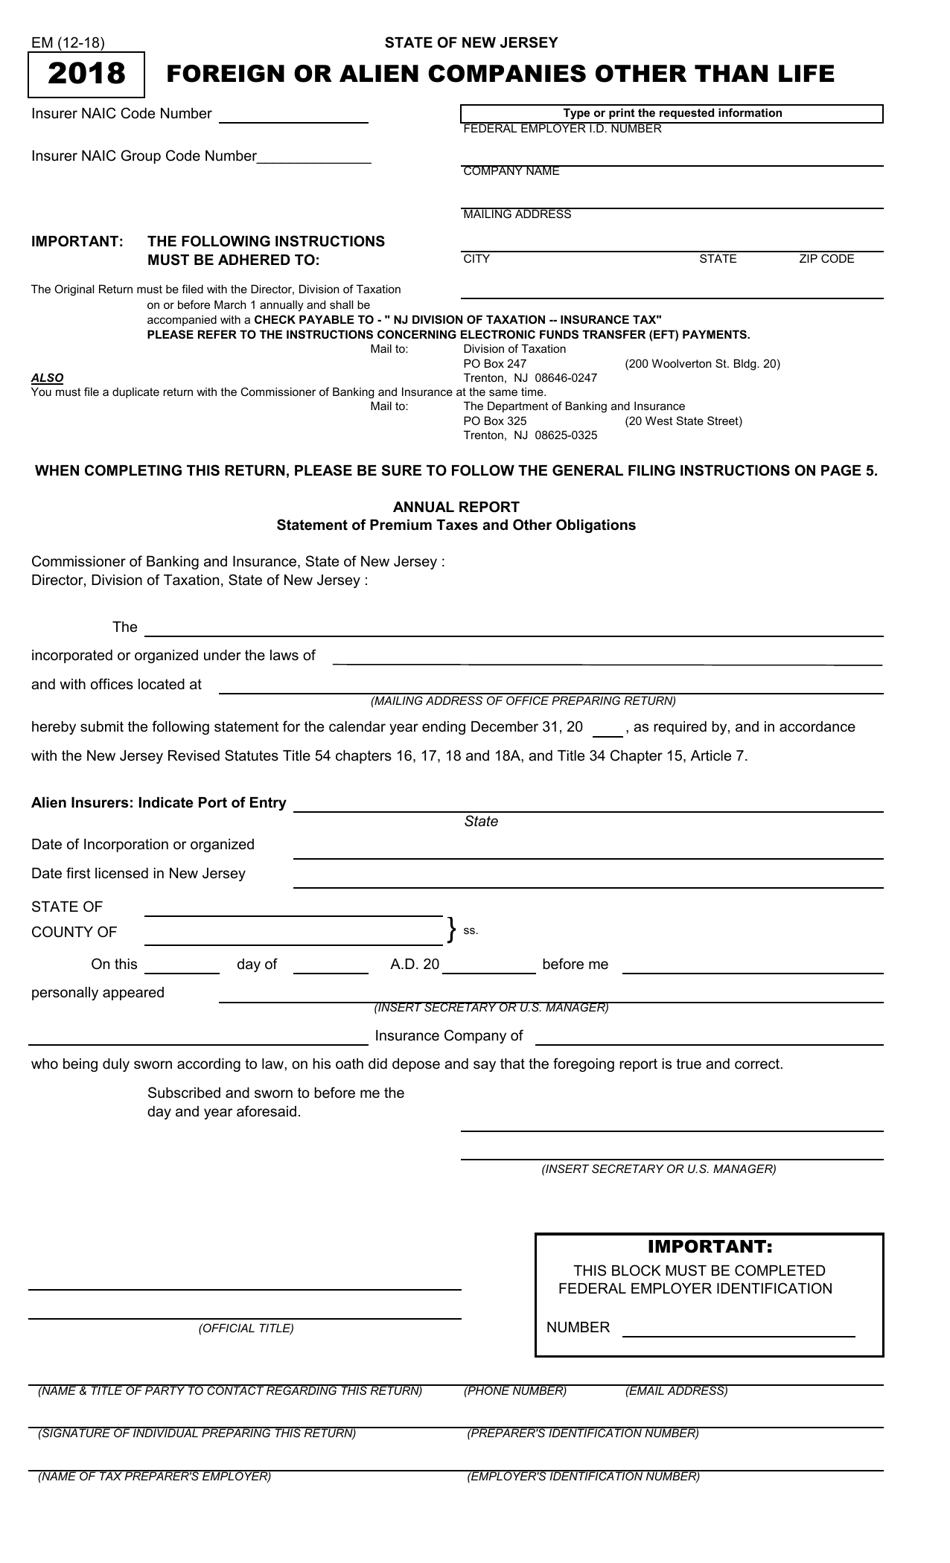 Form EM Foreign or Alien Companies Other Than Life Insurance Premium Tax Return - New Jersey, Page 1